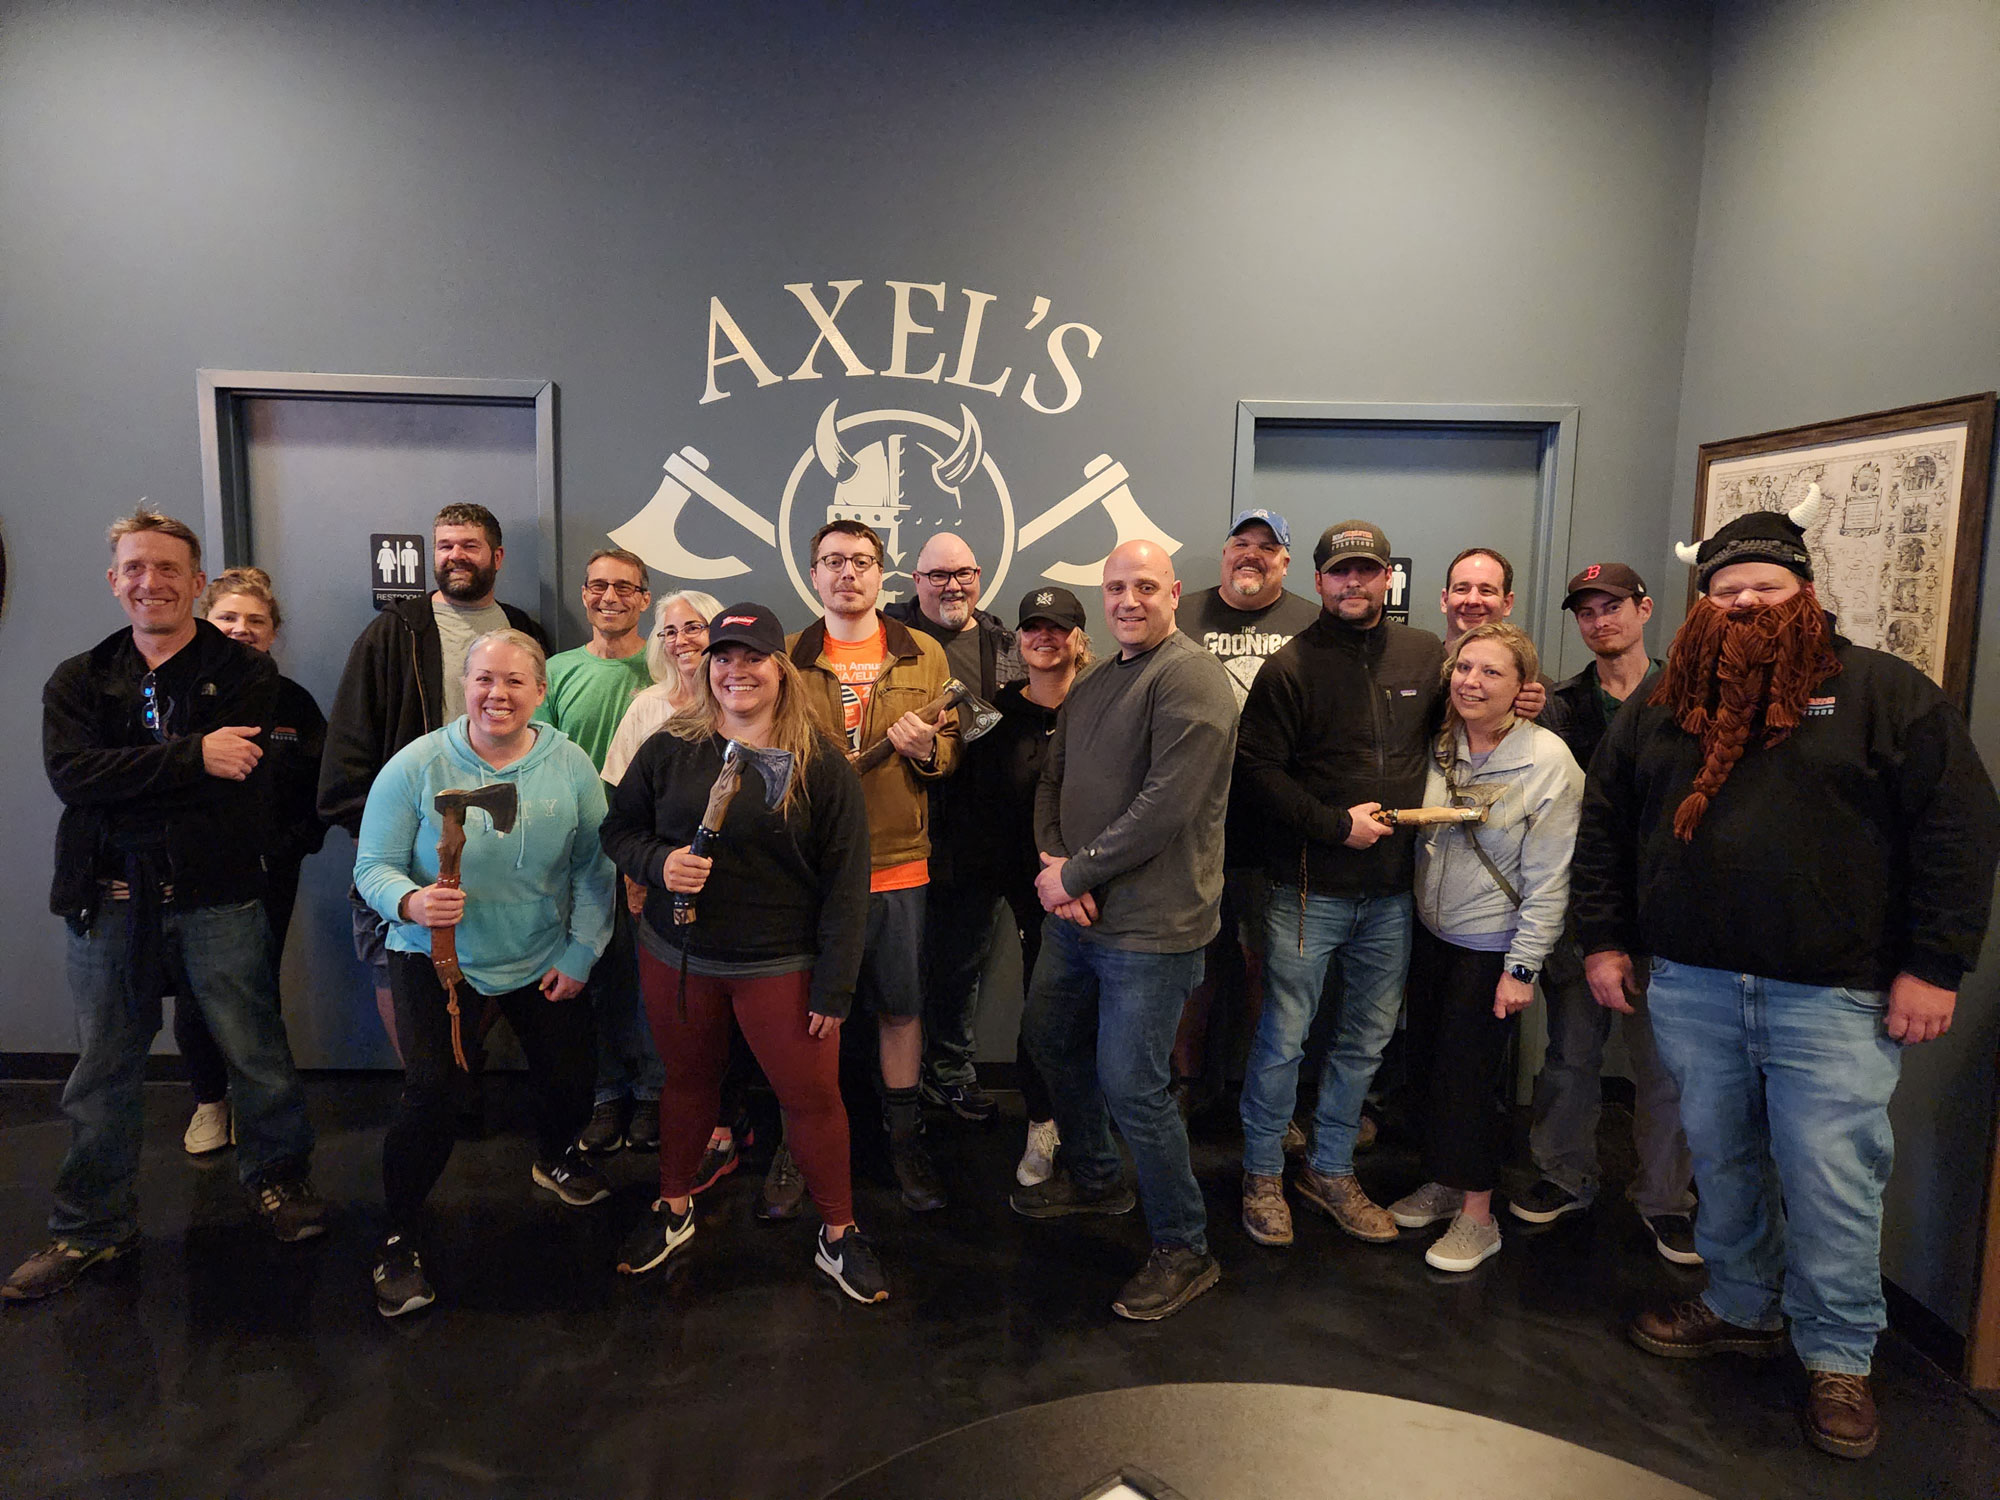 Wednesday Wielders Axel's Throw House axe throwing group photo